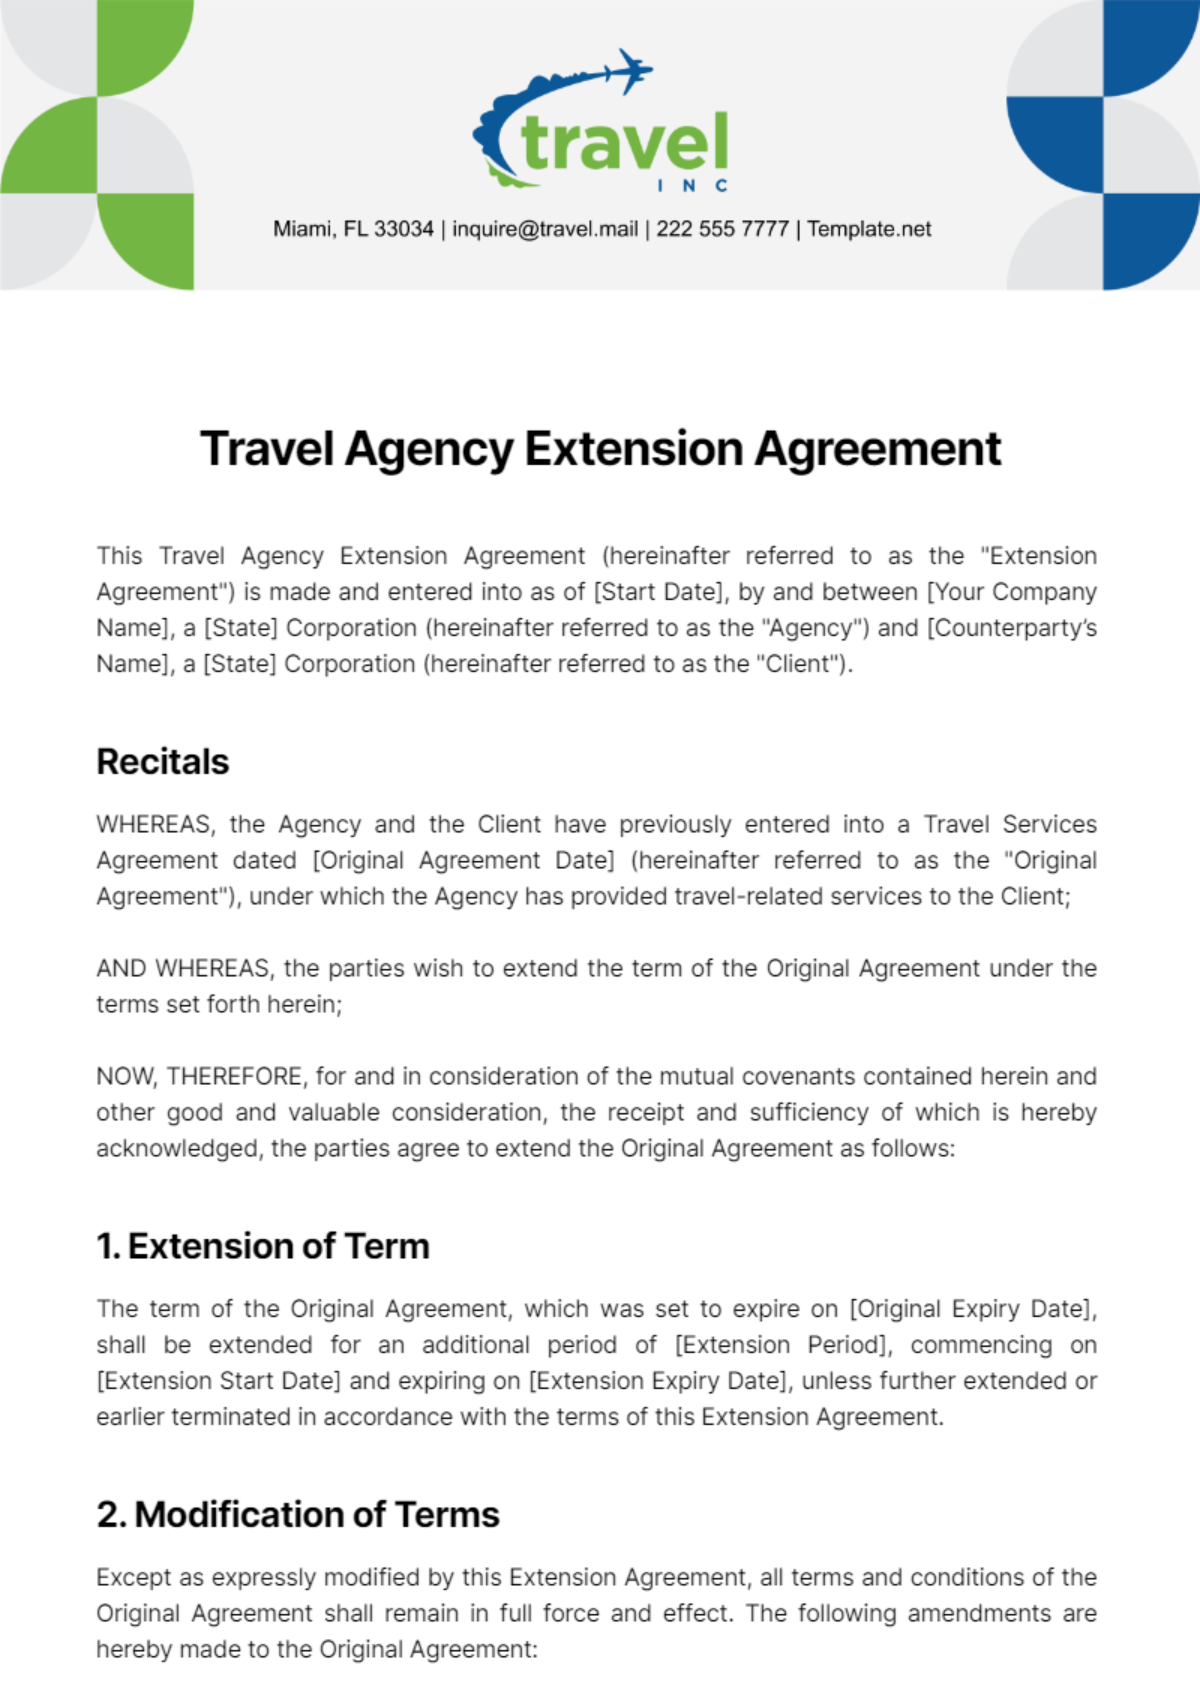 Travel Agency Extension of Agreement Template